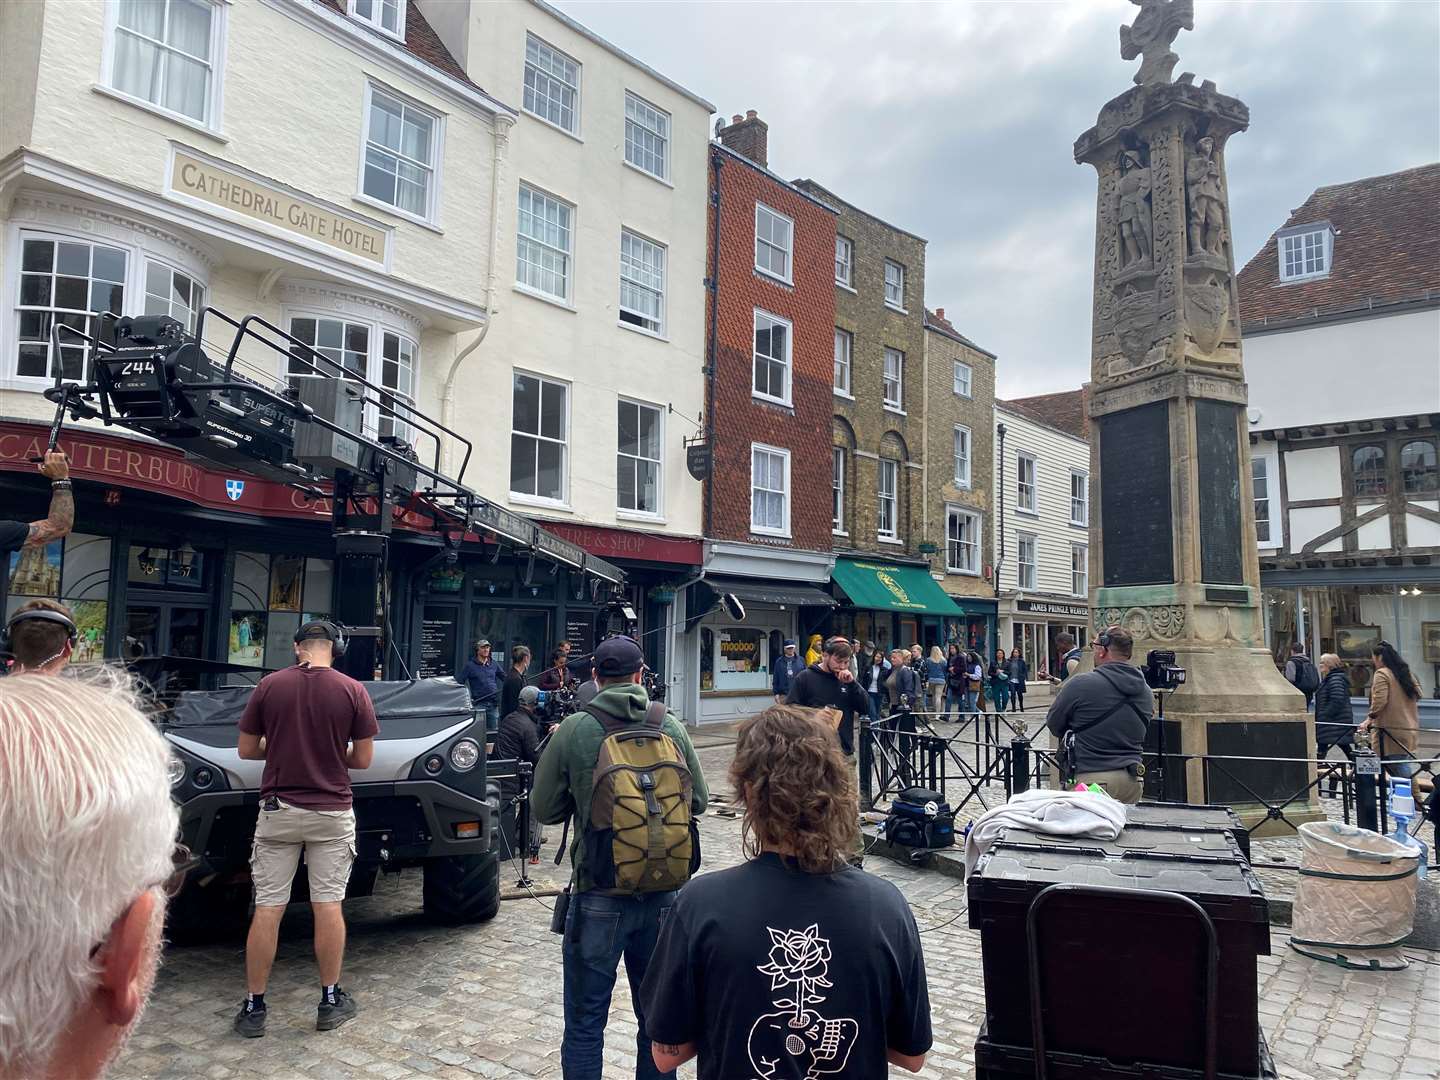 Elisabeth Moss was spotted filming in Buttermarket, Canterbury, earlier today